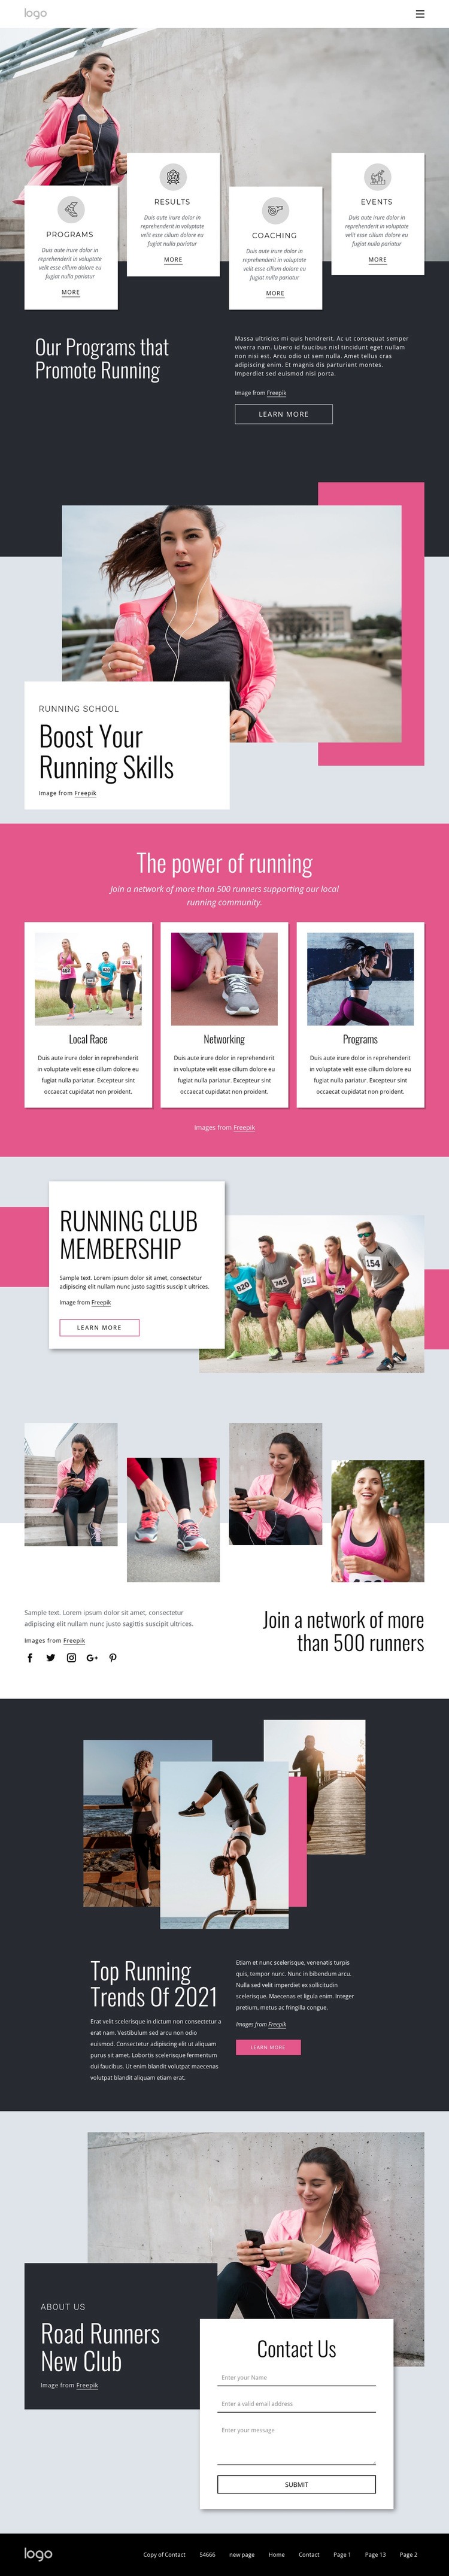 Running and walking community Web Page Design